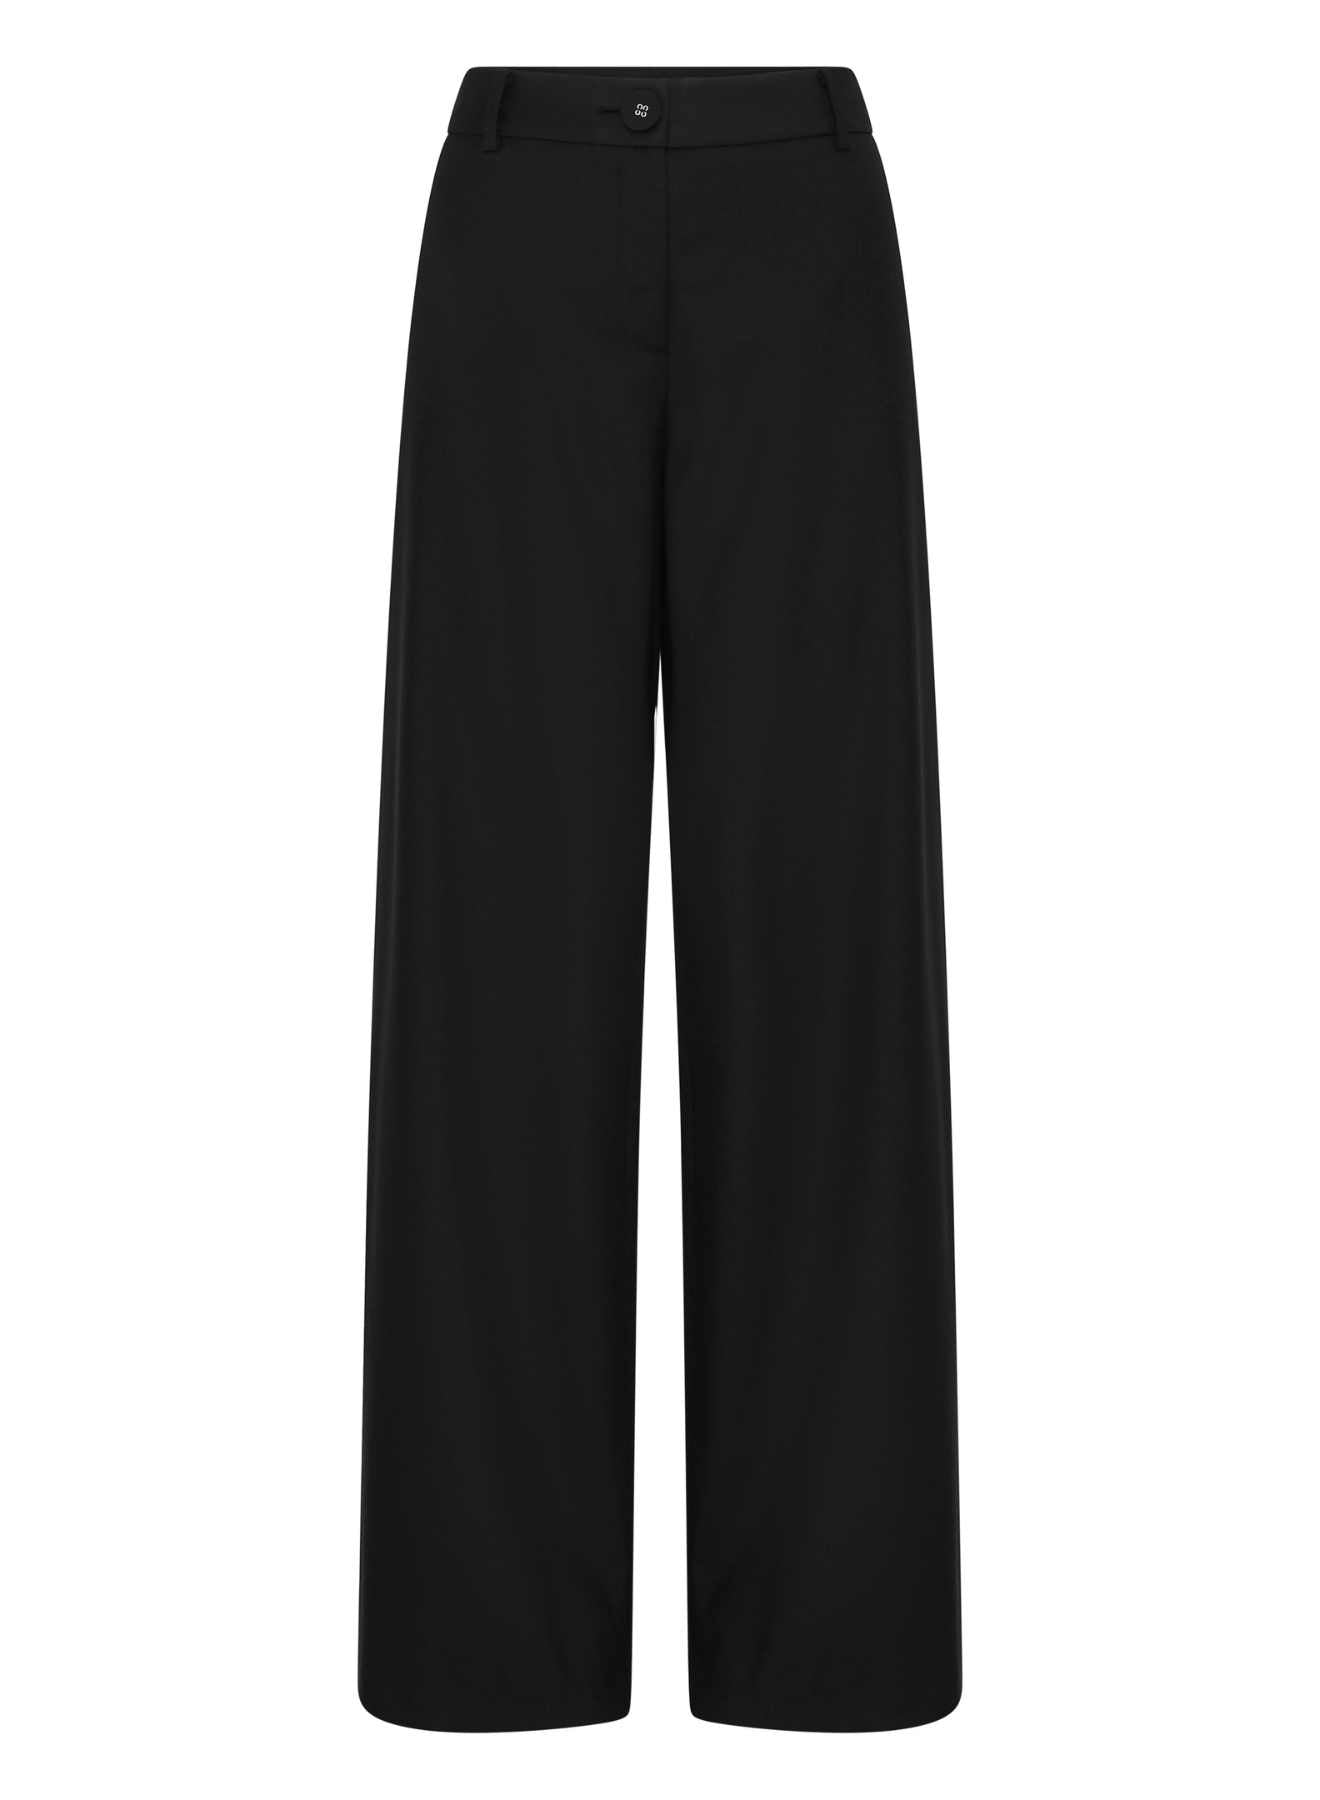 ANNA QUAN's wardrobe staple Wide Leg Tailored Pants, feature a classic button, zip fastening and belt loops. Designed to sit on the waist and the leg hem skimming the floor. Tailored pants, work pants, everyday pants, black work pants, tailored wool pants.